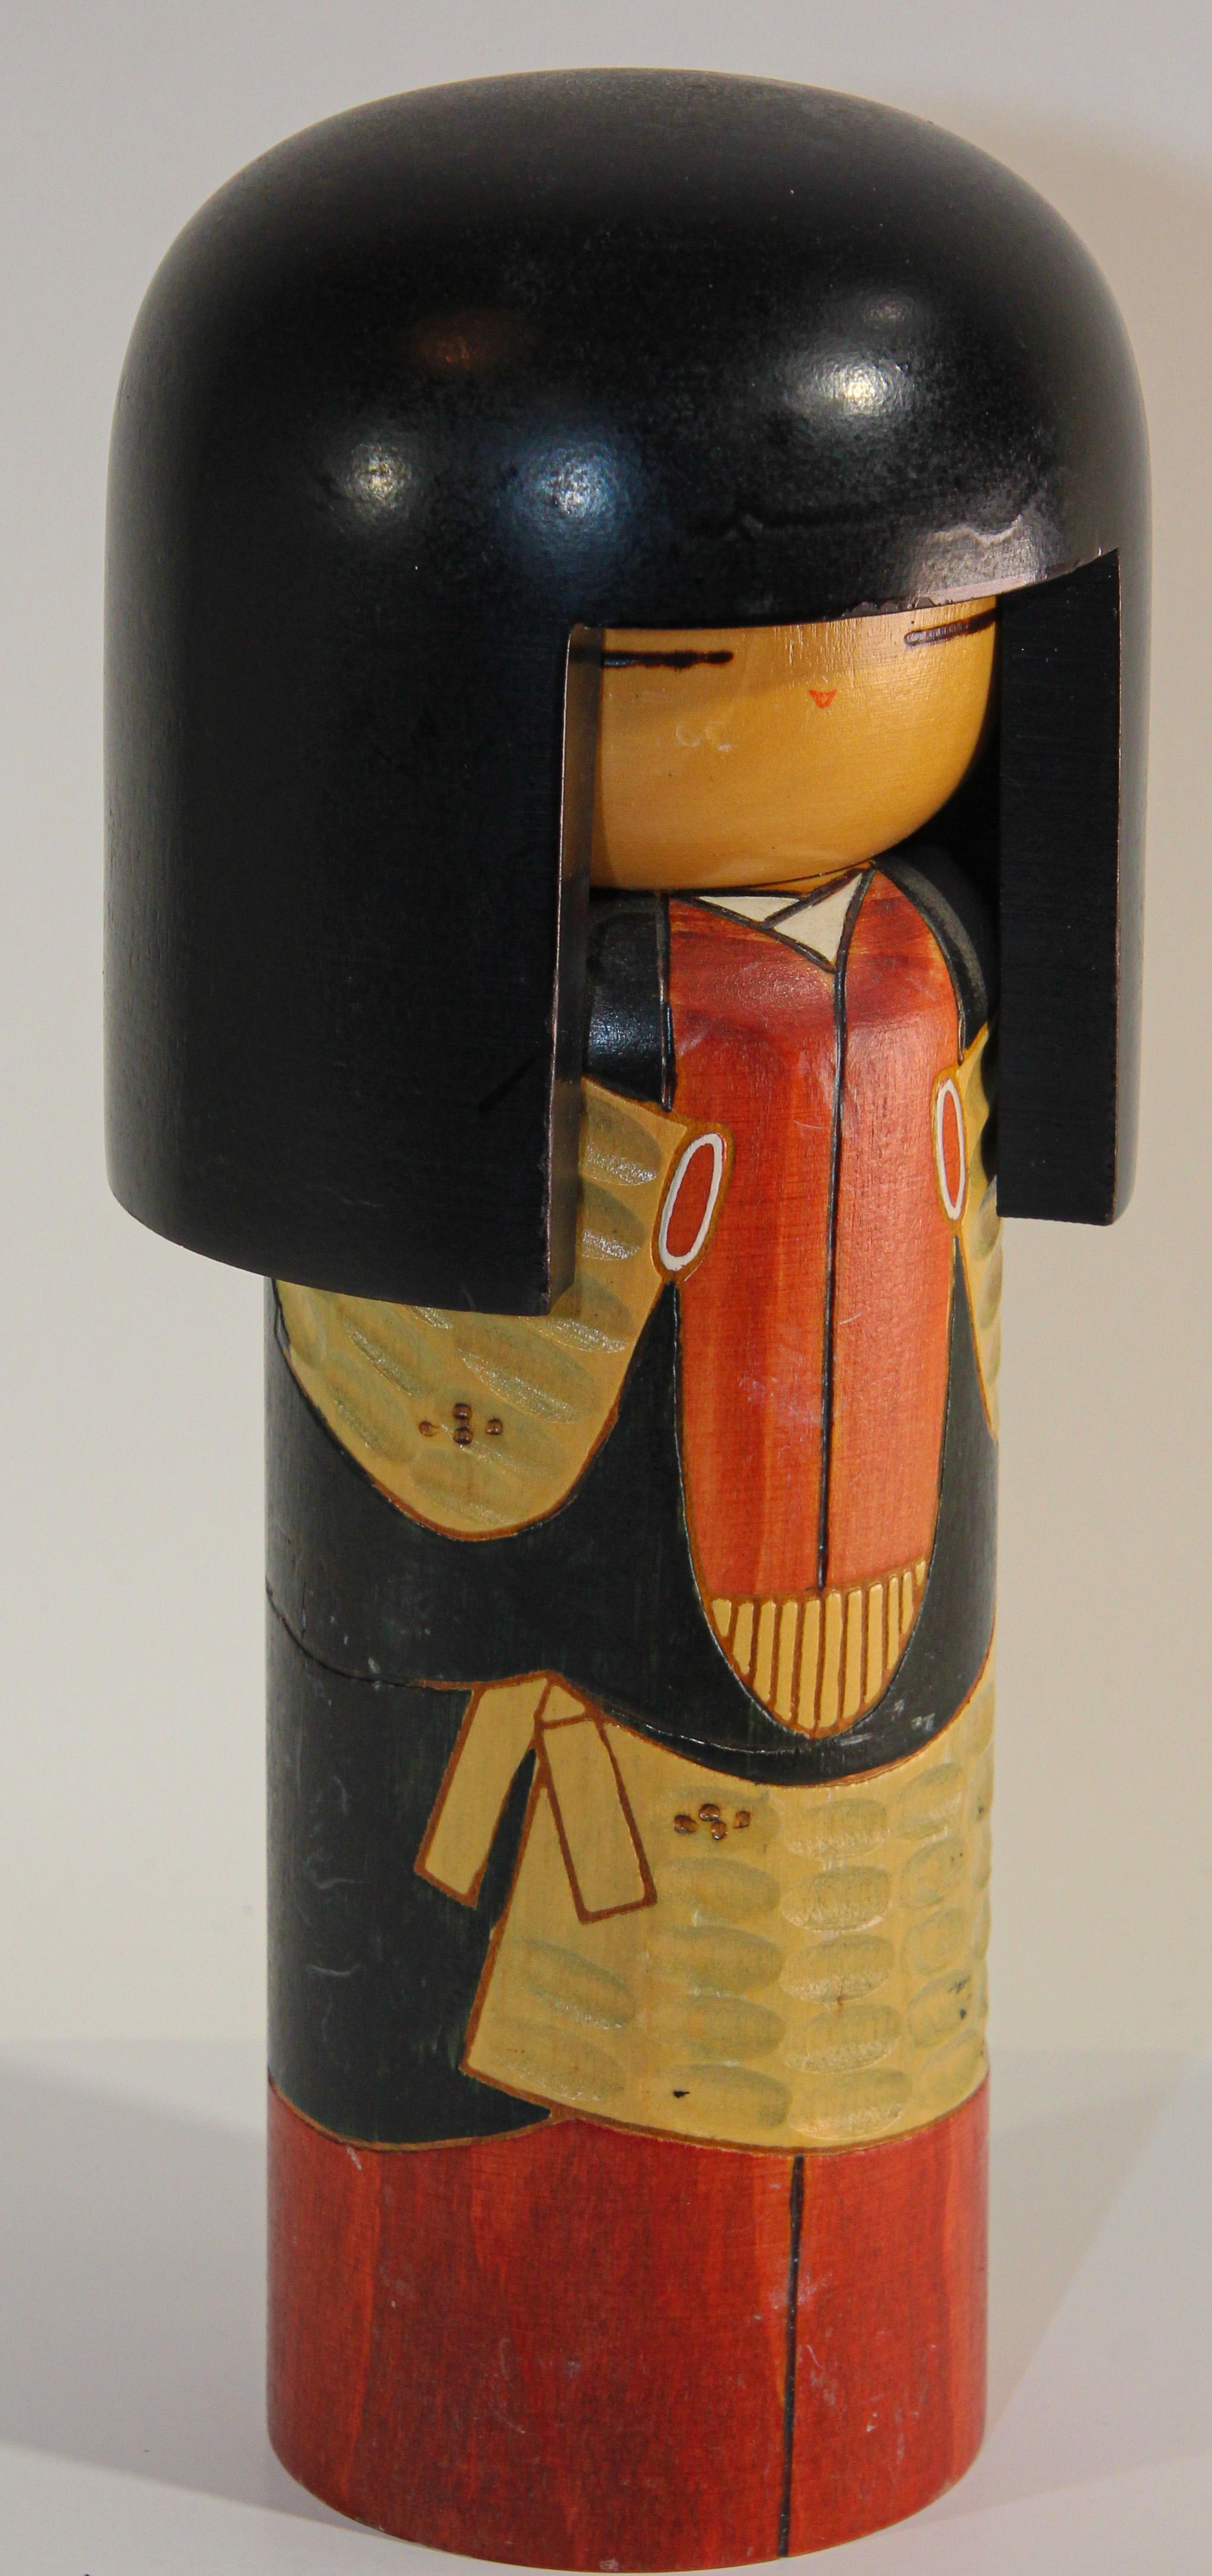 Kokeshi or Kokashi doll handmade by Japanese artisans from wood. 
The dolls have a simple trunk as a body and an enlarged head. 
One characteristic of Kokeshi dolls is their lack of arms and legs.
signed underneath as follow.
Kokashi Doll Kegon